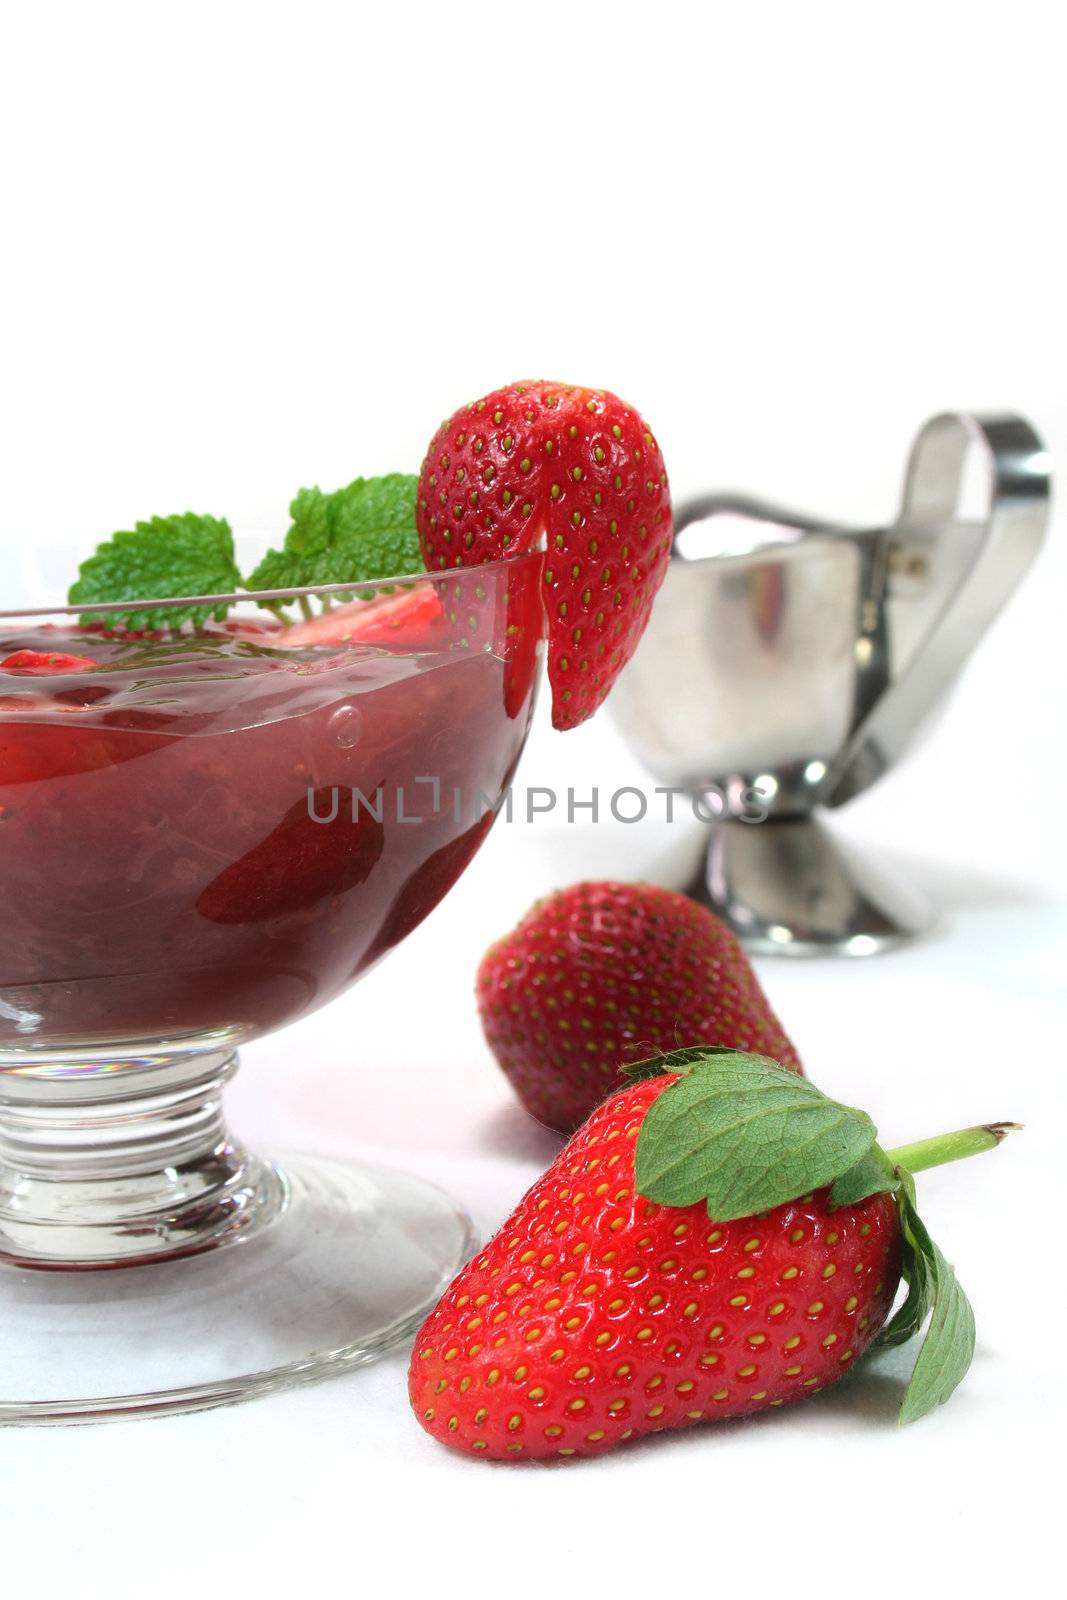 Red berry compote by silencefoto